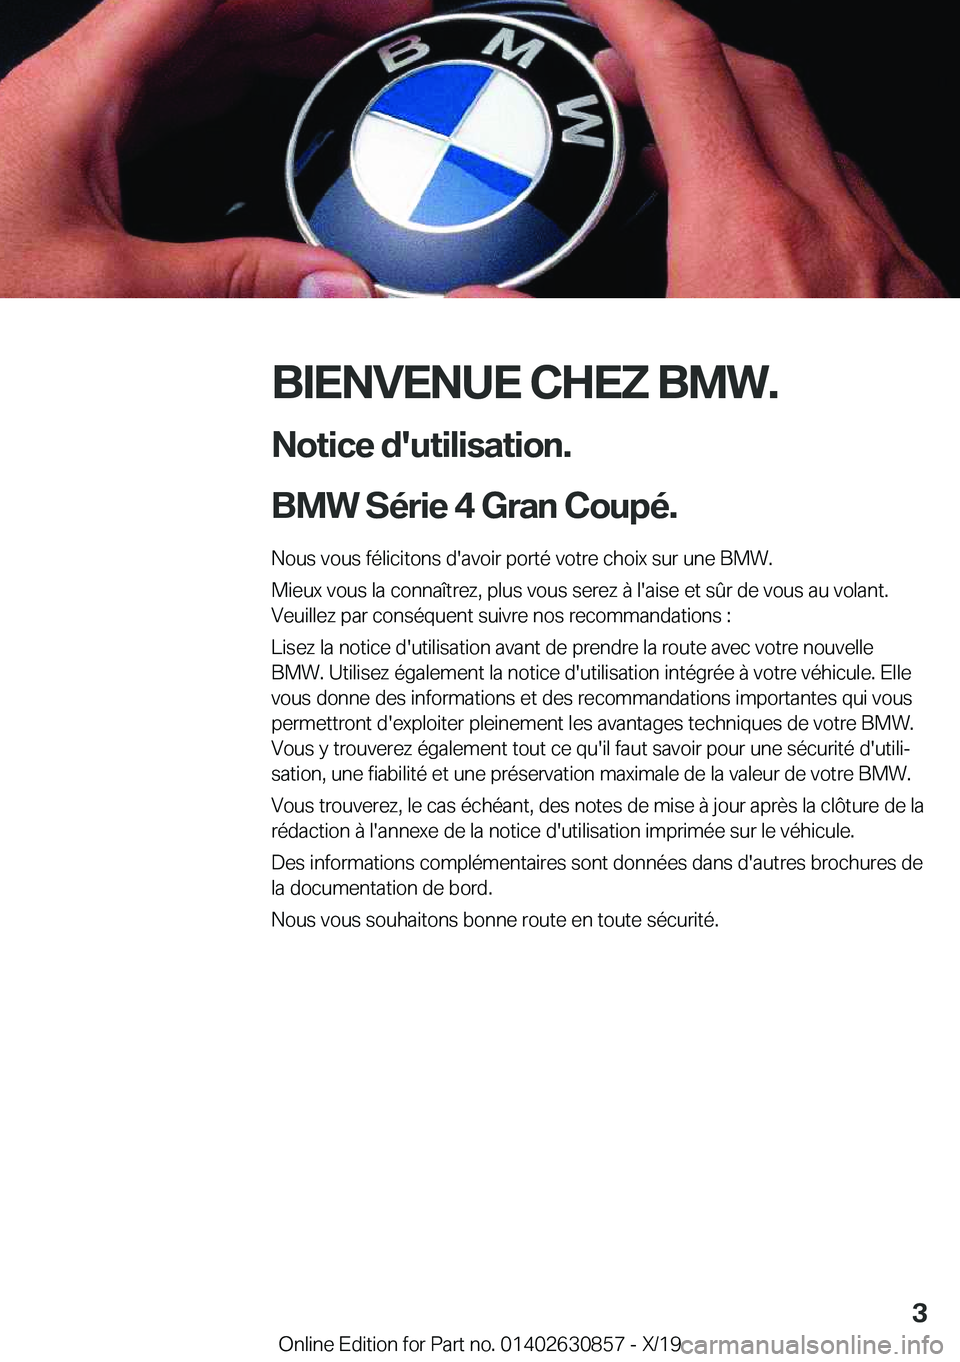 BMW 4 SERIES GRAN COUPE 2020  Notices Demploi (in French) �B�I�E�N�V�E�N�U�E��C�H�E�;��B�M�W�.�N�o�t�i�c�e��d�'�u�t�i�l�i�s�a�t�i�o�n�.
�B�M�W��S�é�r�i�e��4��G�r�a�n��C�o�u�p�é�.�
�N�o�u�s��v�o�u�s��f�é�l�i�c�i�t�o�n�s��d�'�a�v�o�i�r��